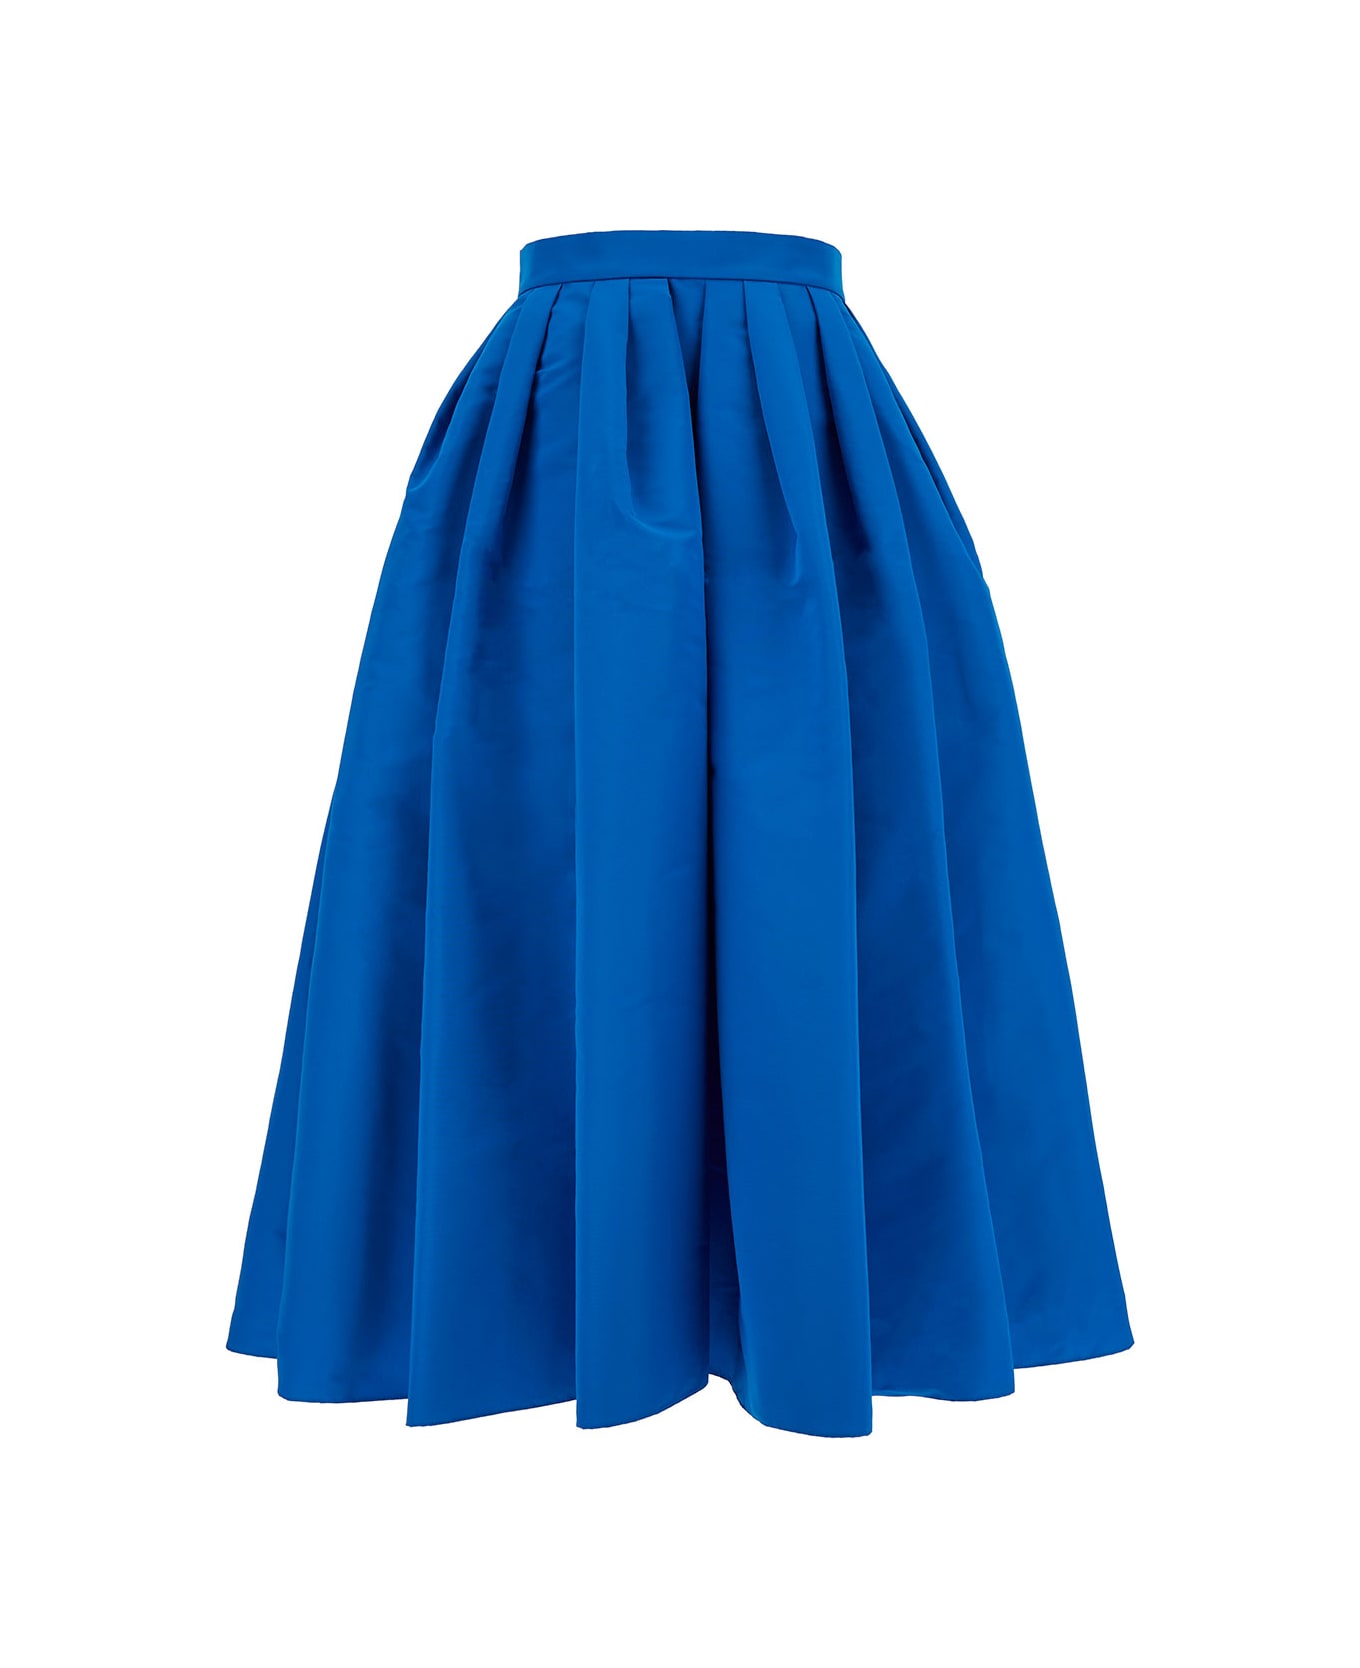 Alexander McQueen Midi Skirt With Matching Waistband In Pleated Fabric - Blu スカート